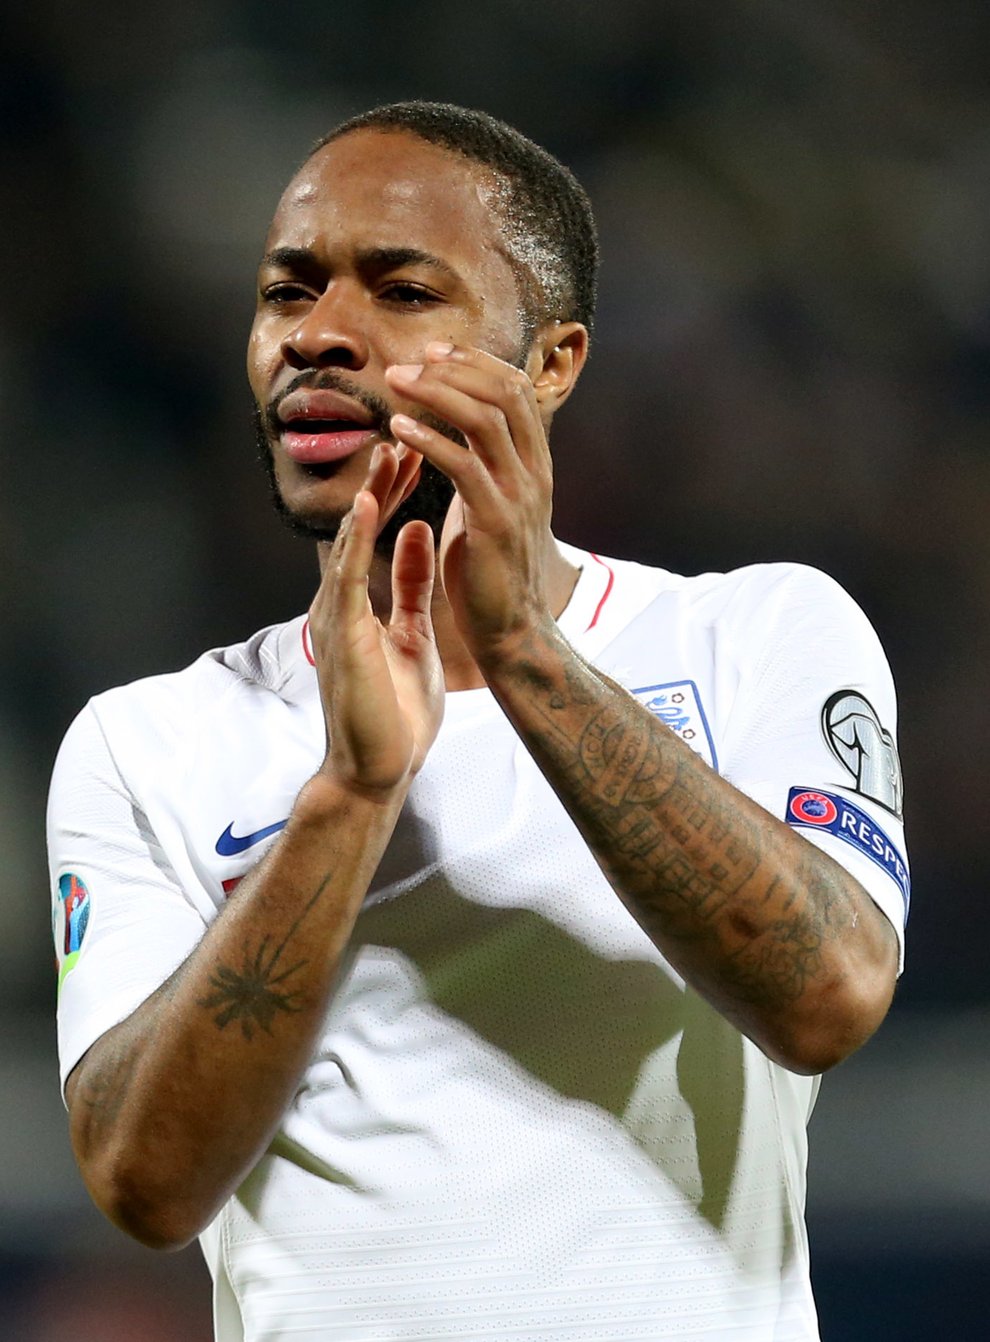 Raheem Sterling scored from the penalty spot as England won 1-0 in Iceland in the Nations League.